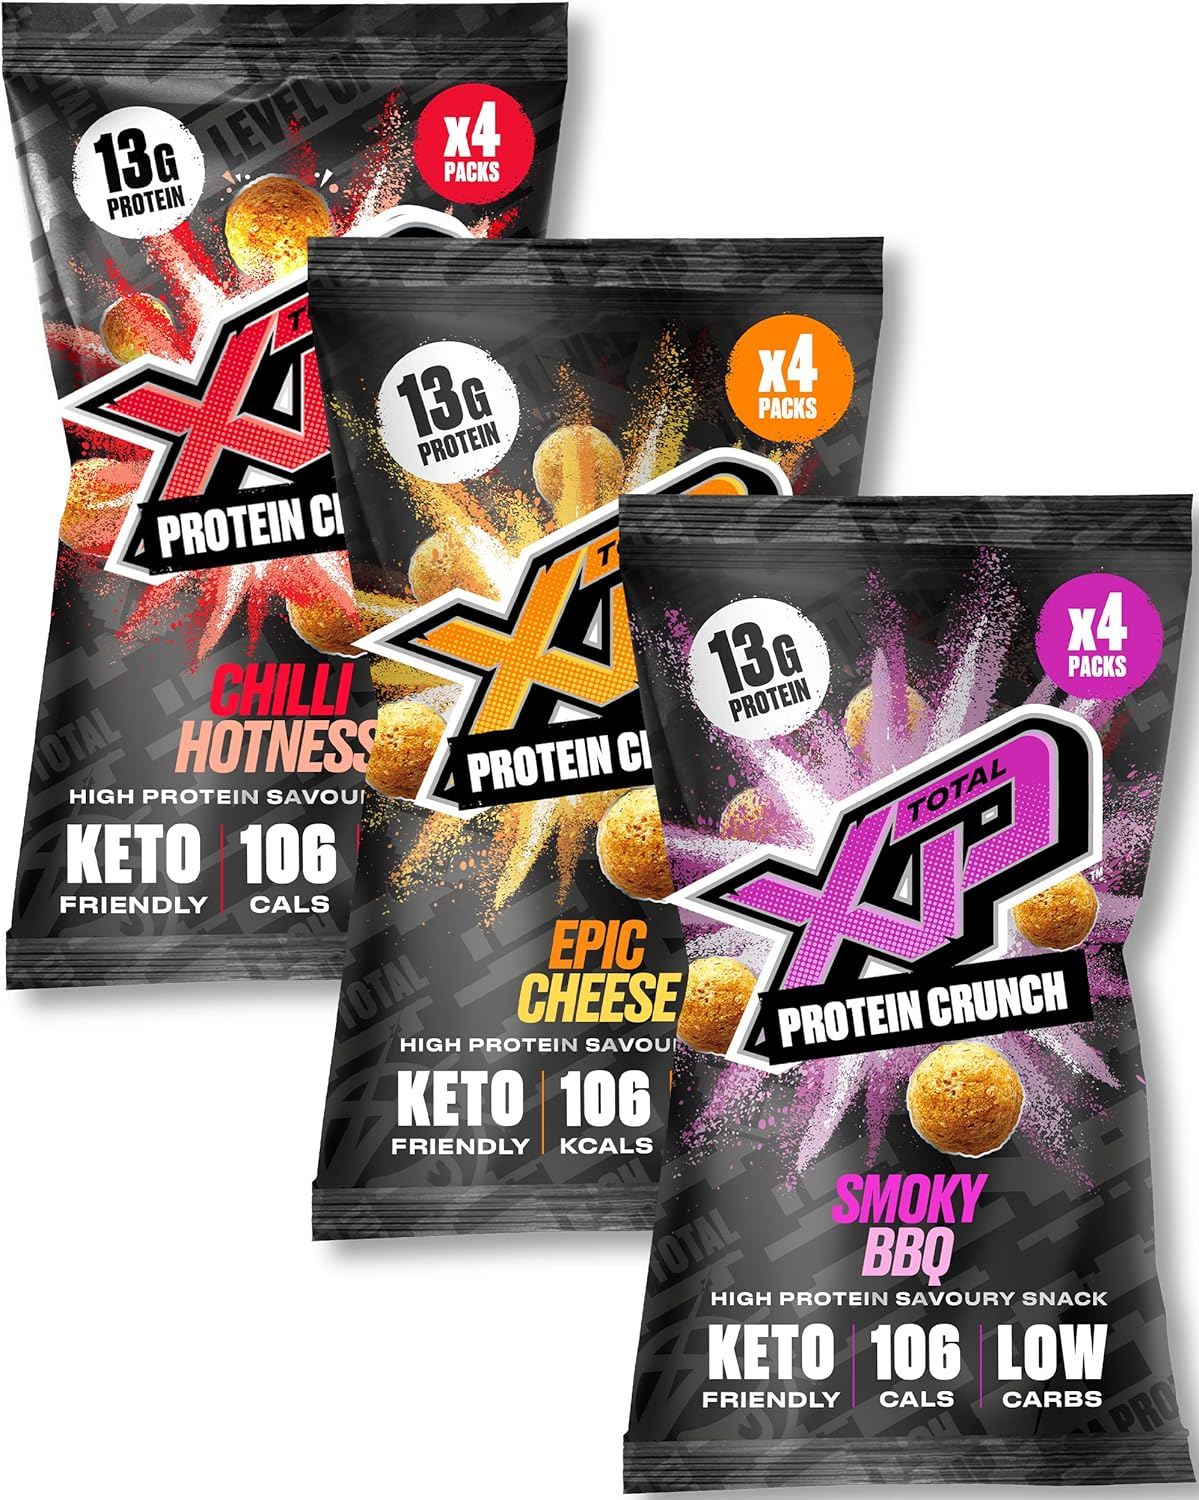 TOTAL XP Protein Crunch Review